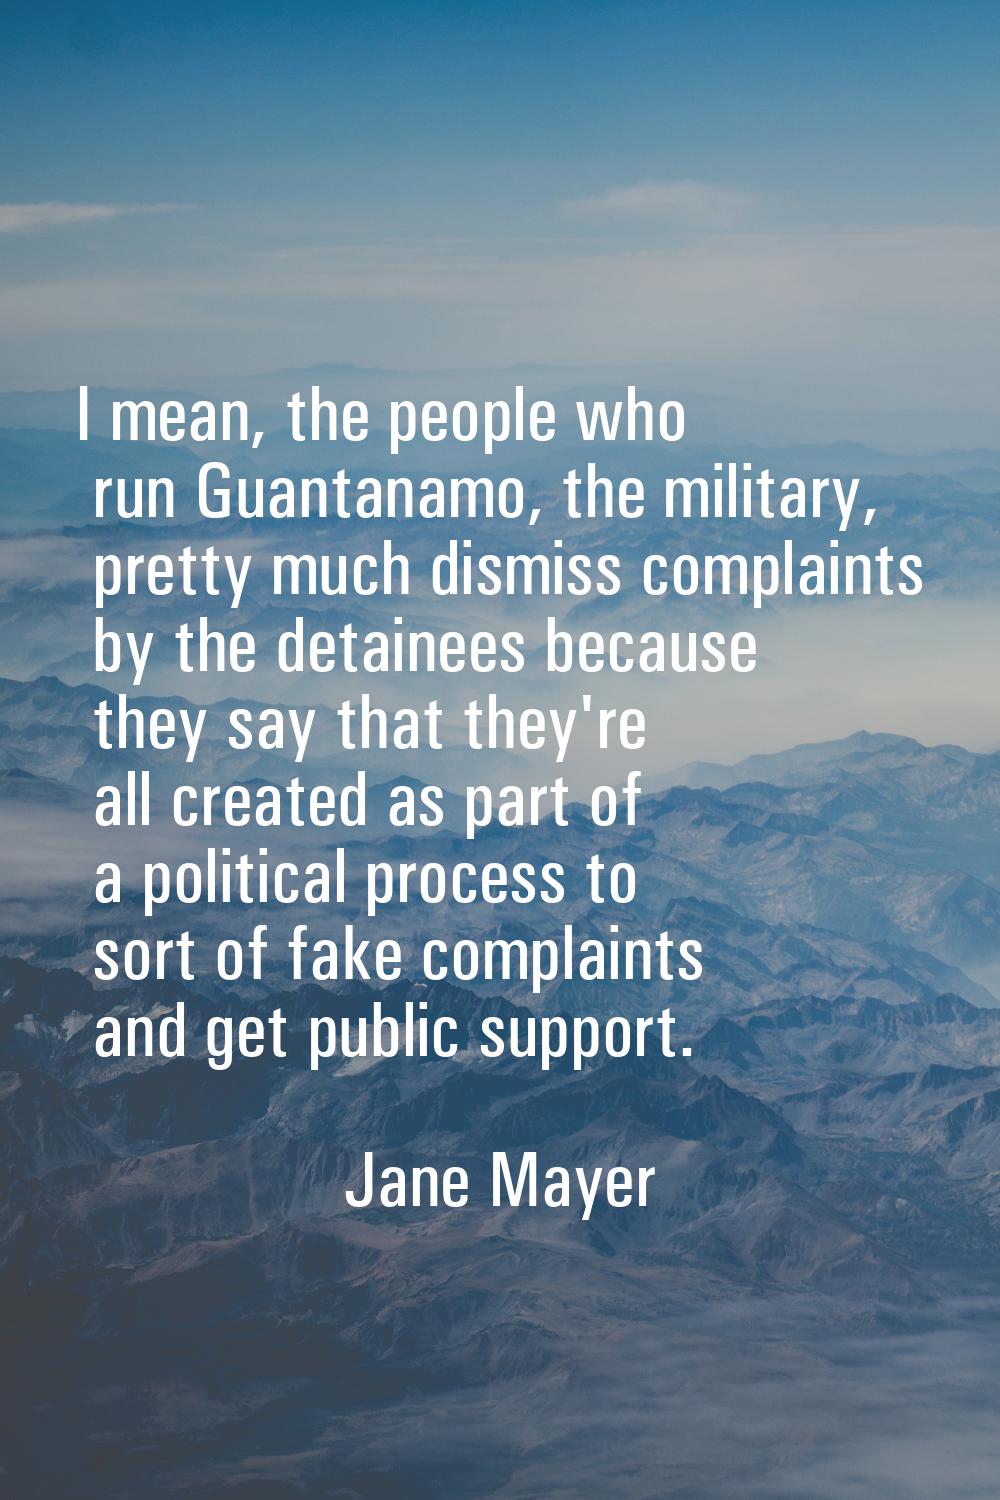 I mean, the people who run Guantanamo, the military, pretty much dismiss complaints by the detainee